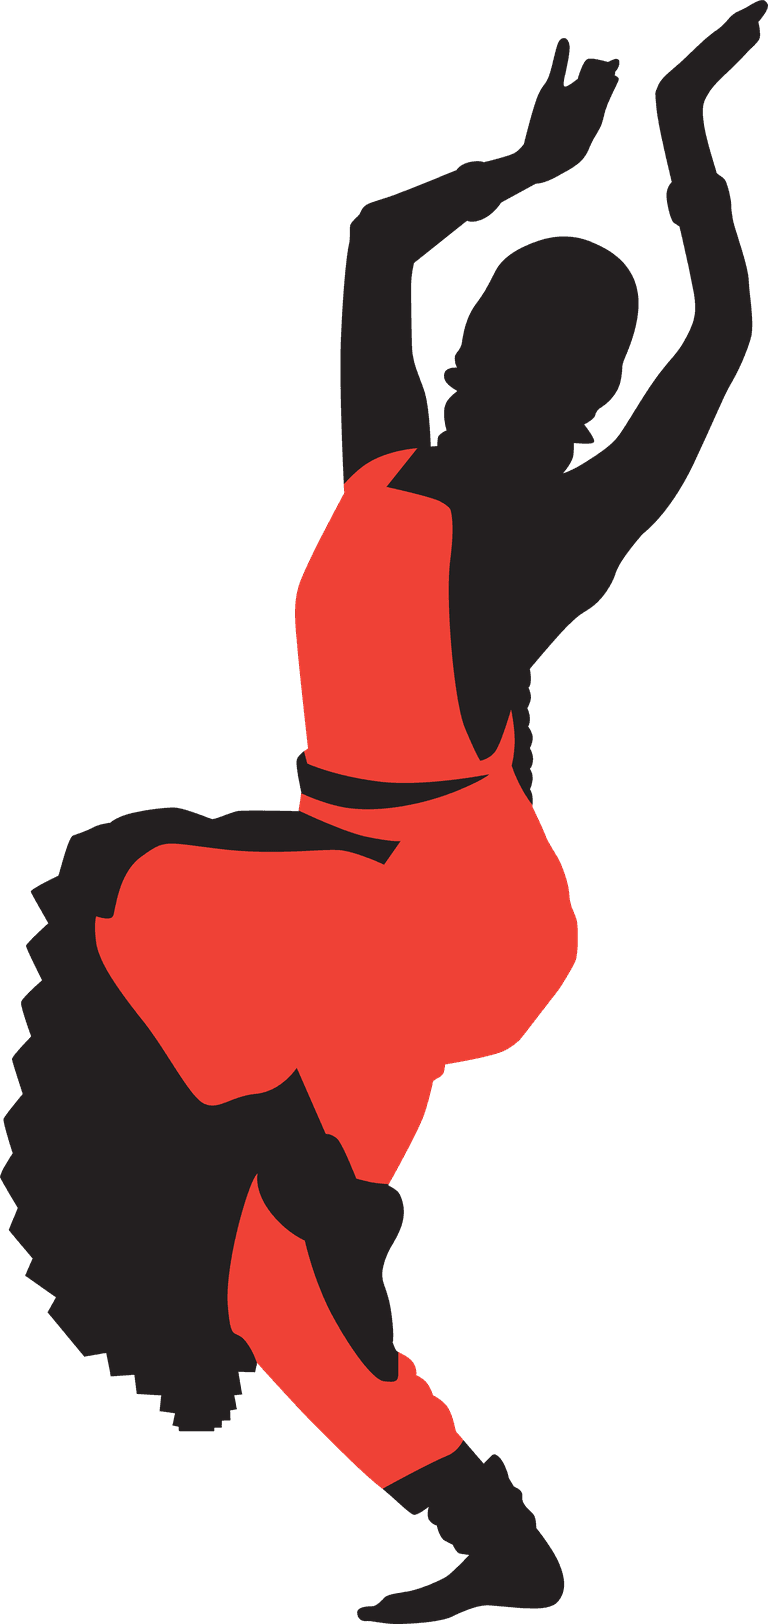 dancer collection of traditional indian dance silhouettes vector